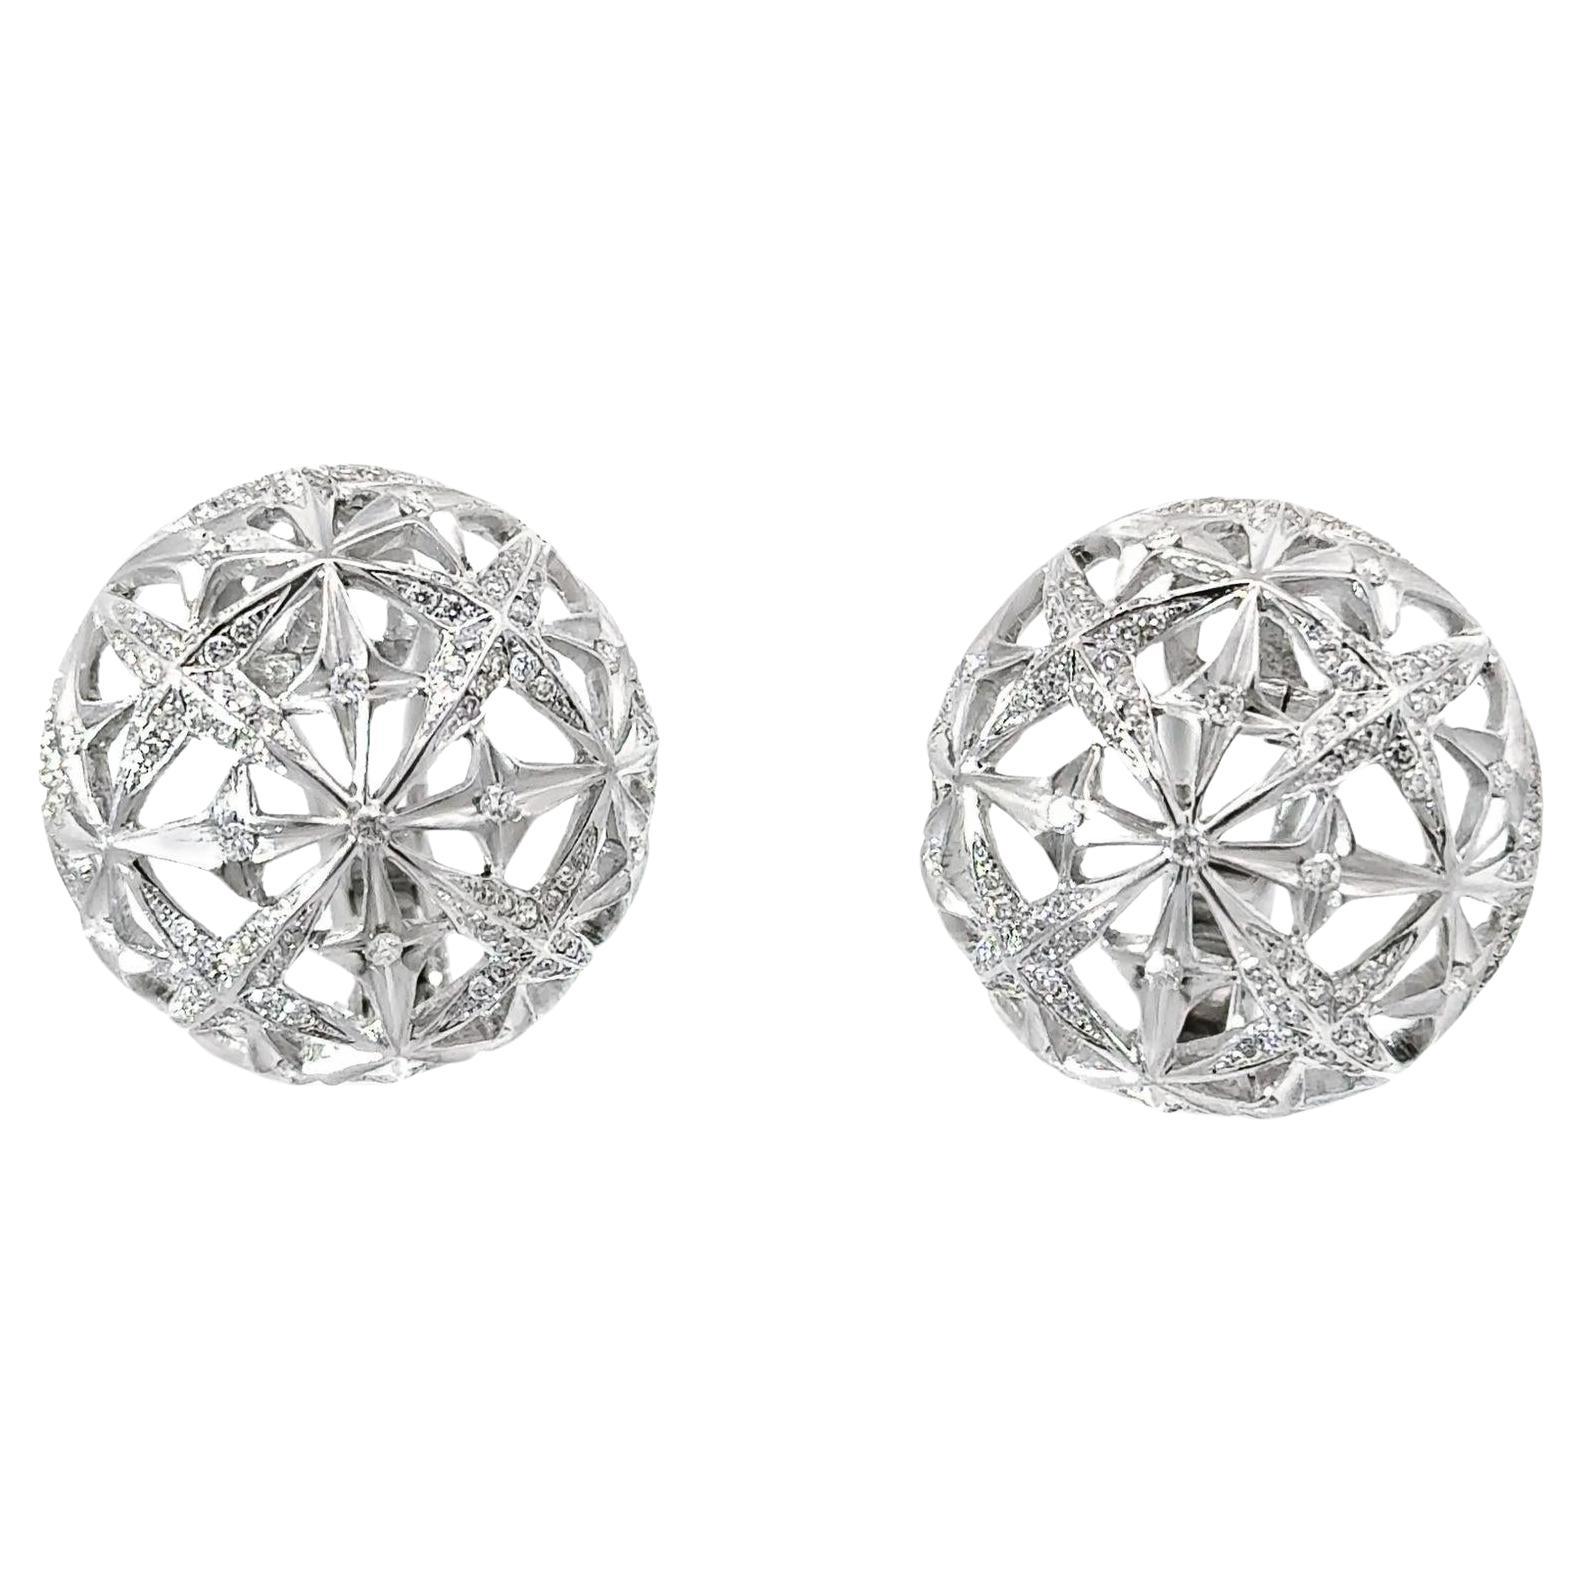 A magnificent dome of 1.67 carats of round brilliant-cut diamonds are set in a three-dimensional shape giving a perfect stellar aspect to the jewel. The silhouette lends a sense of volume and dimension to the earrings, creating a subtle yet striking